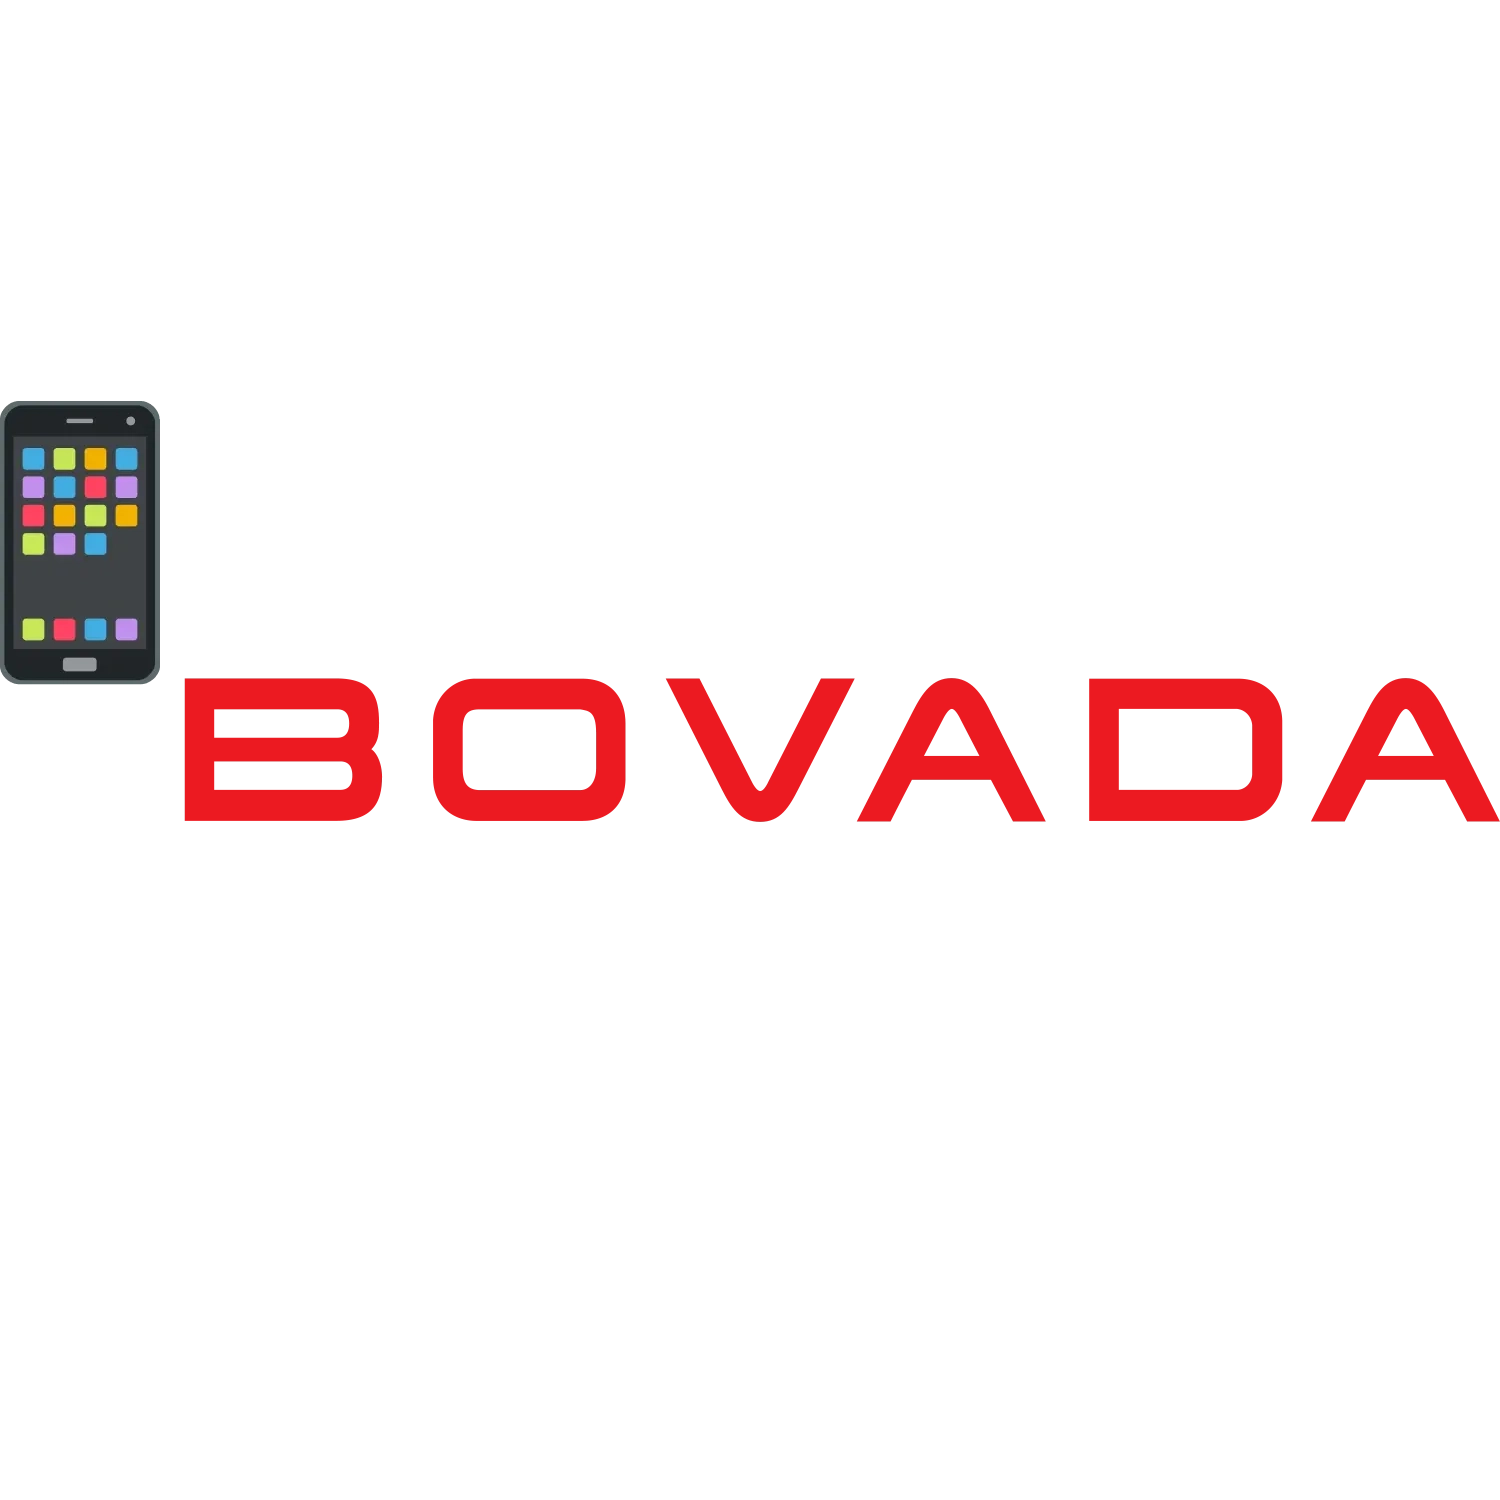 You will find high-quality gambling games and their analogues in the Bovada app.